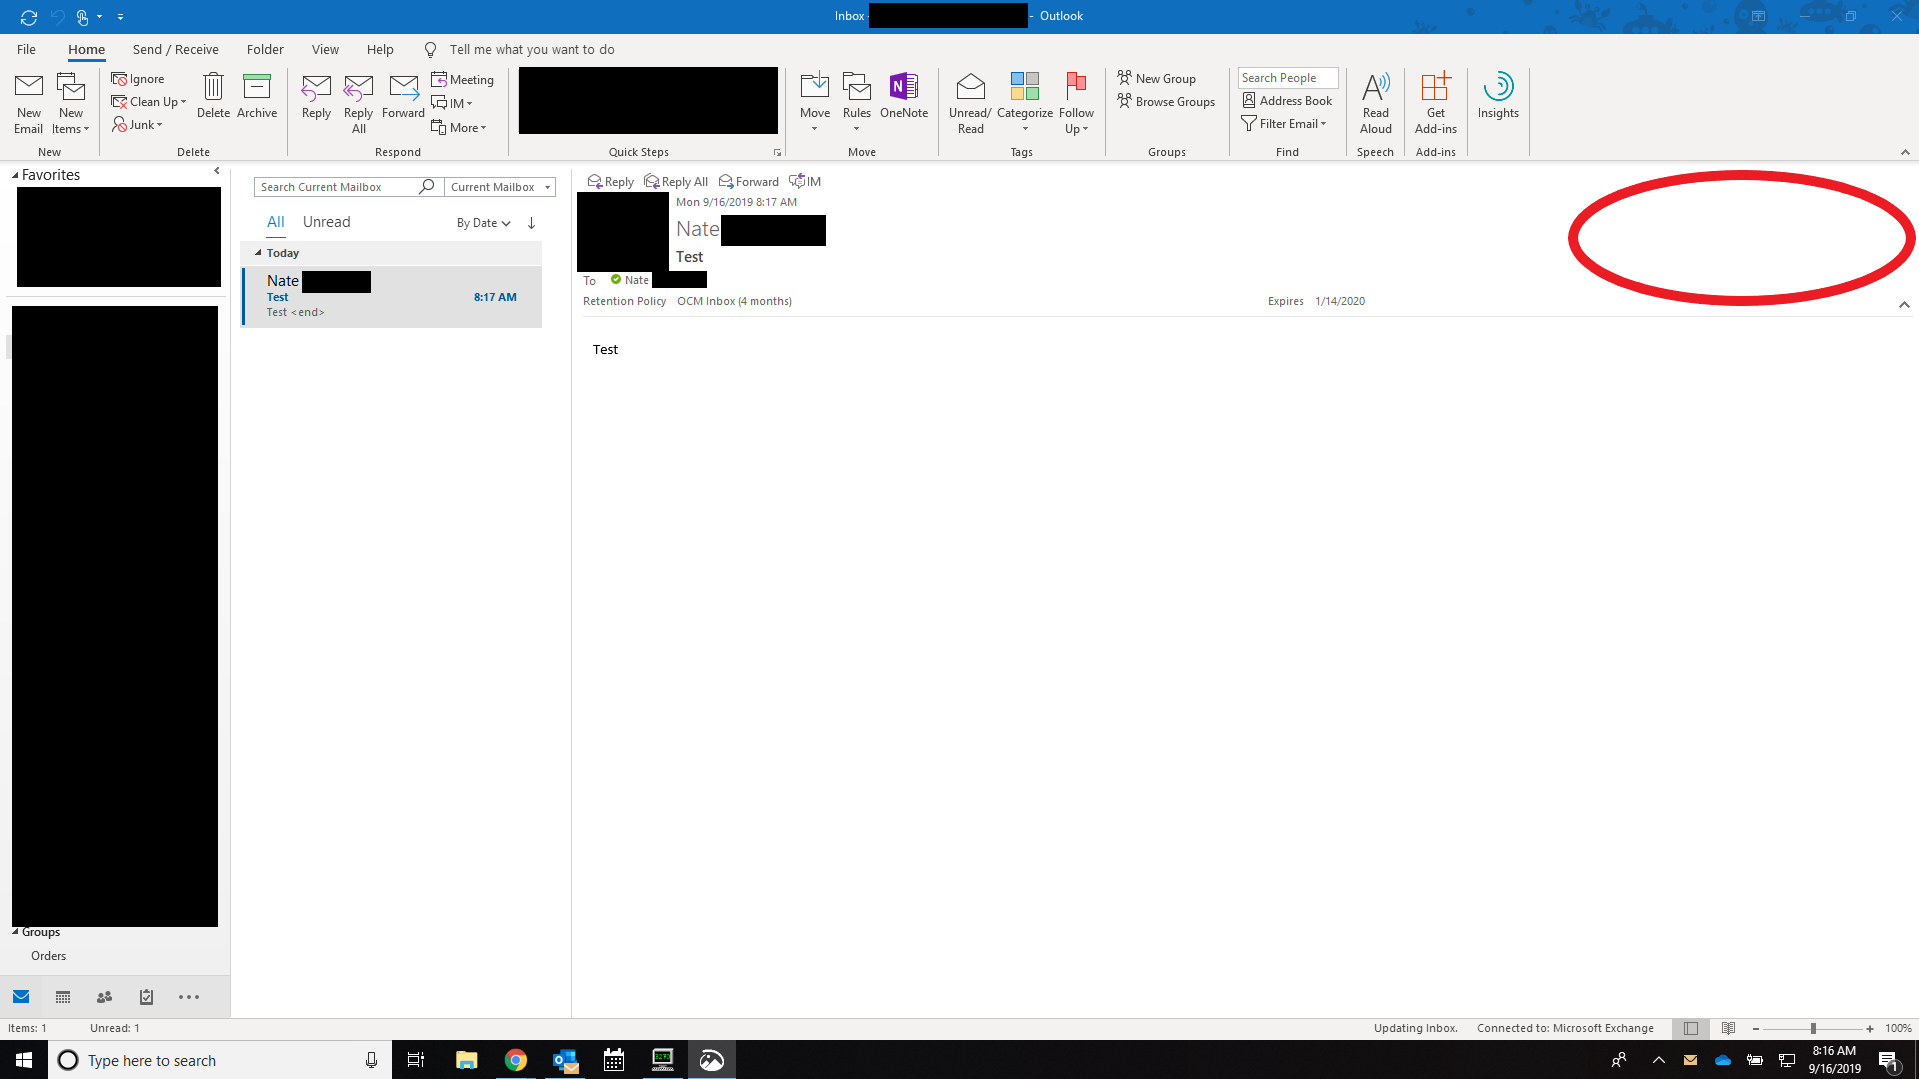 How do I go back to the old Outlook look?